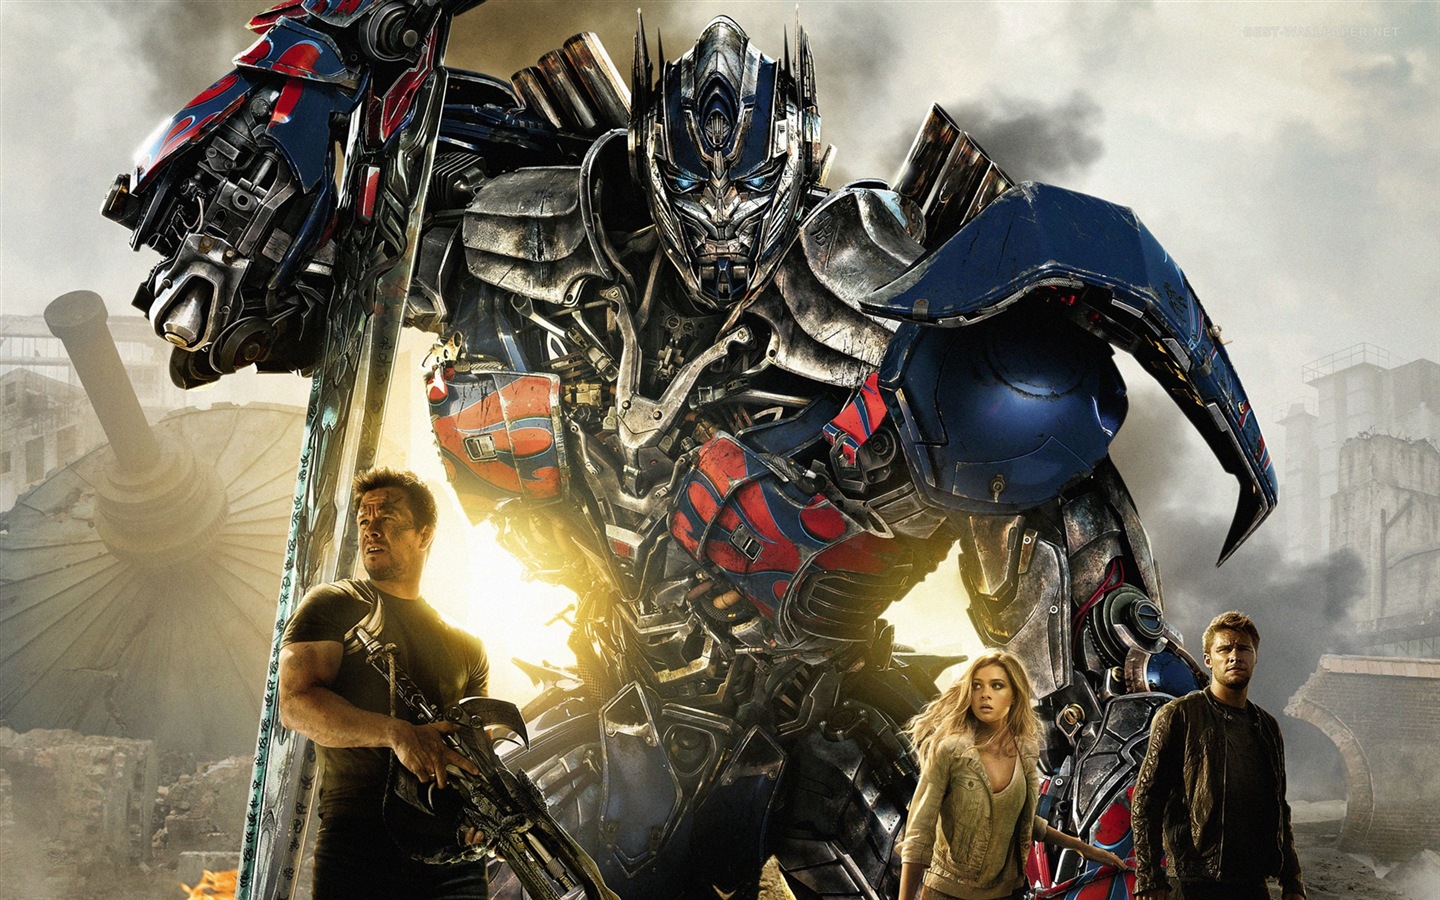 2014 Transformers: Age of Extinction HD wallpapers #1 - 1440x900